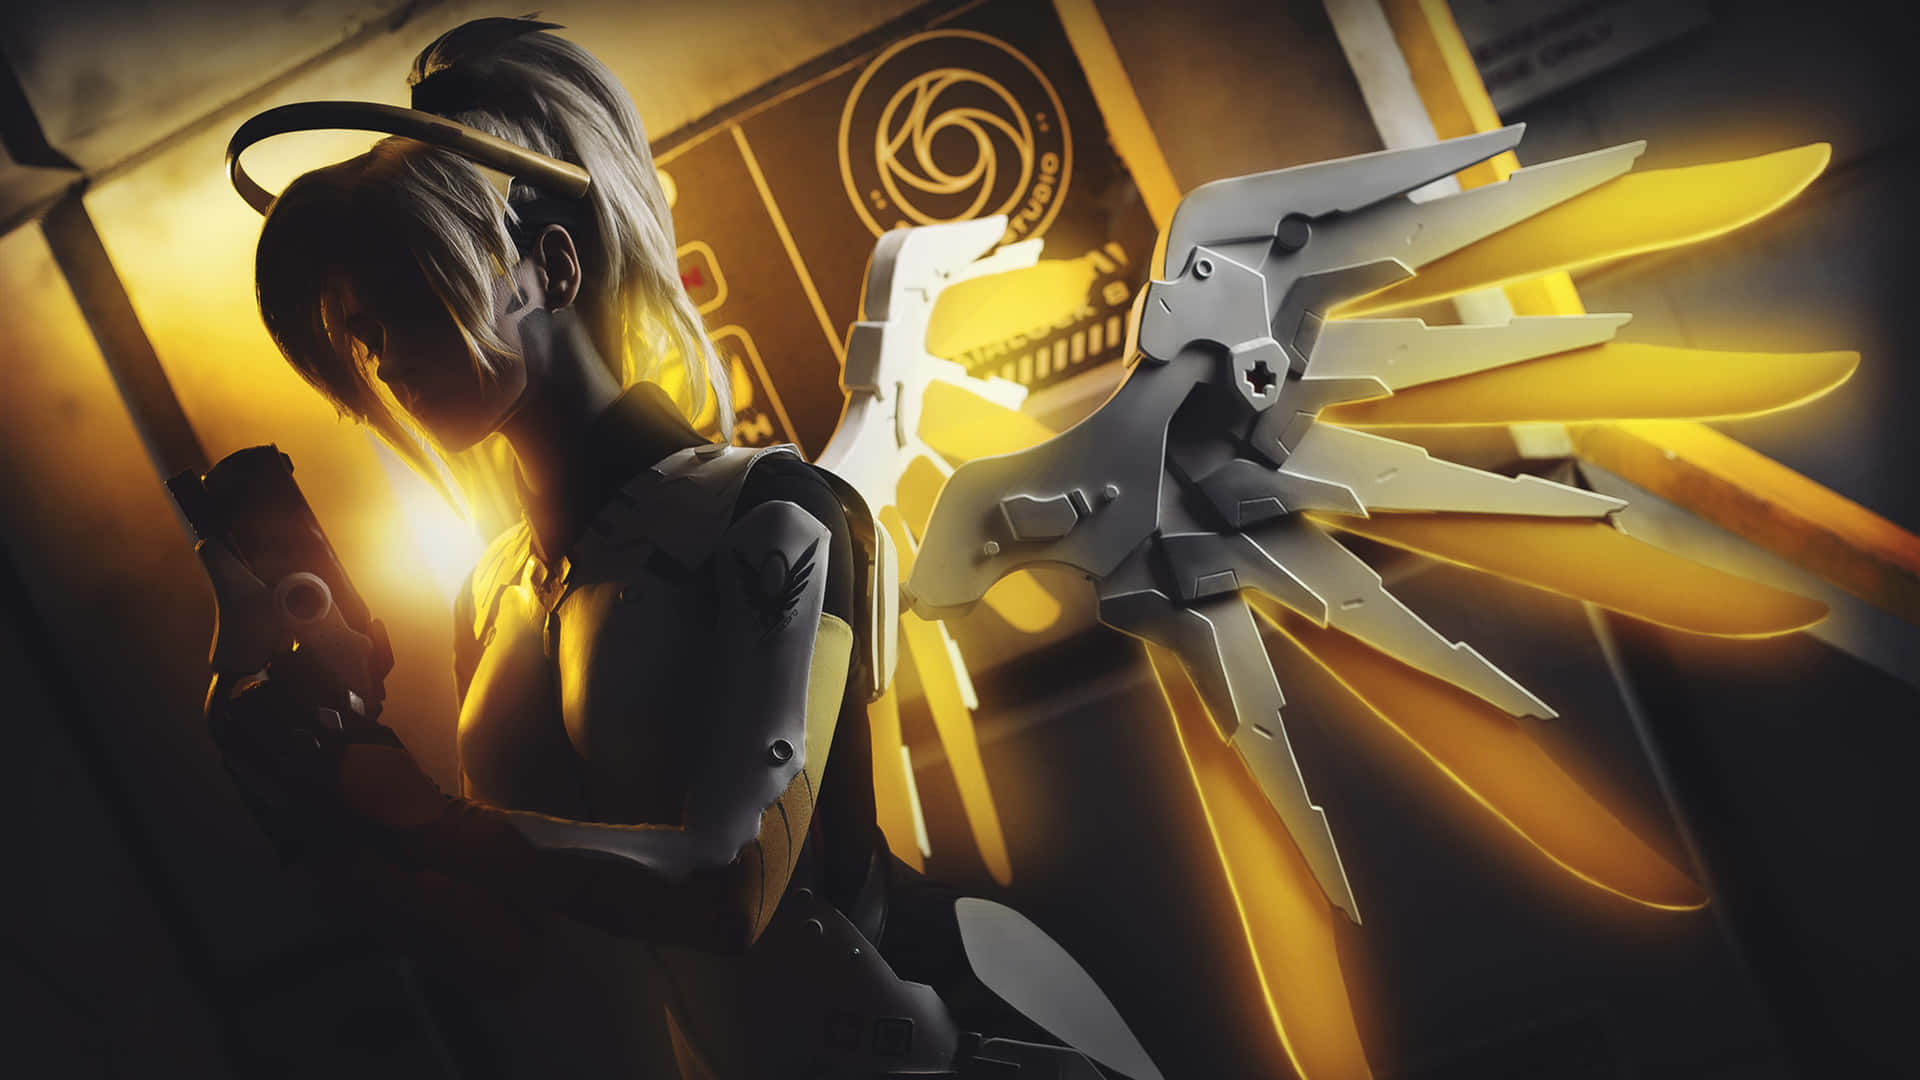 Add Some Mercy to Your Day! Wallpaper